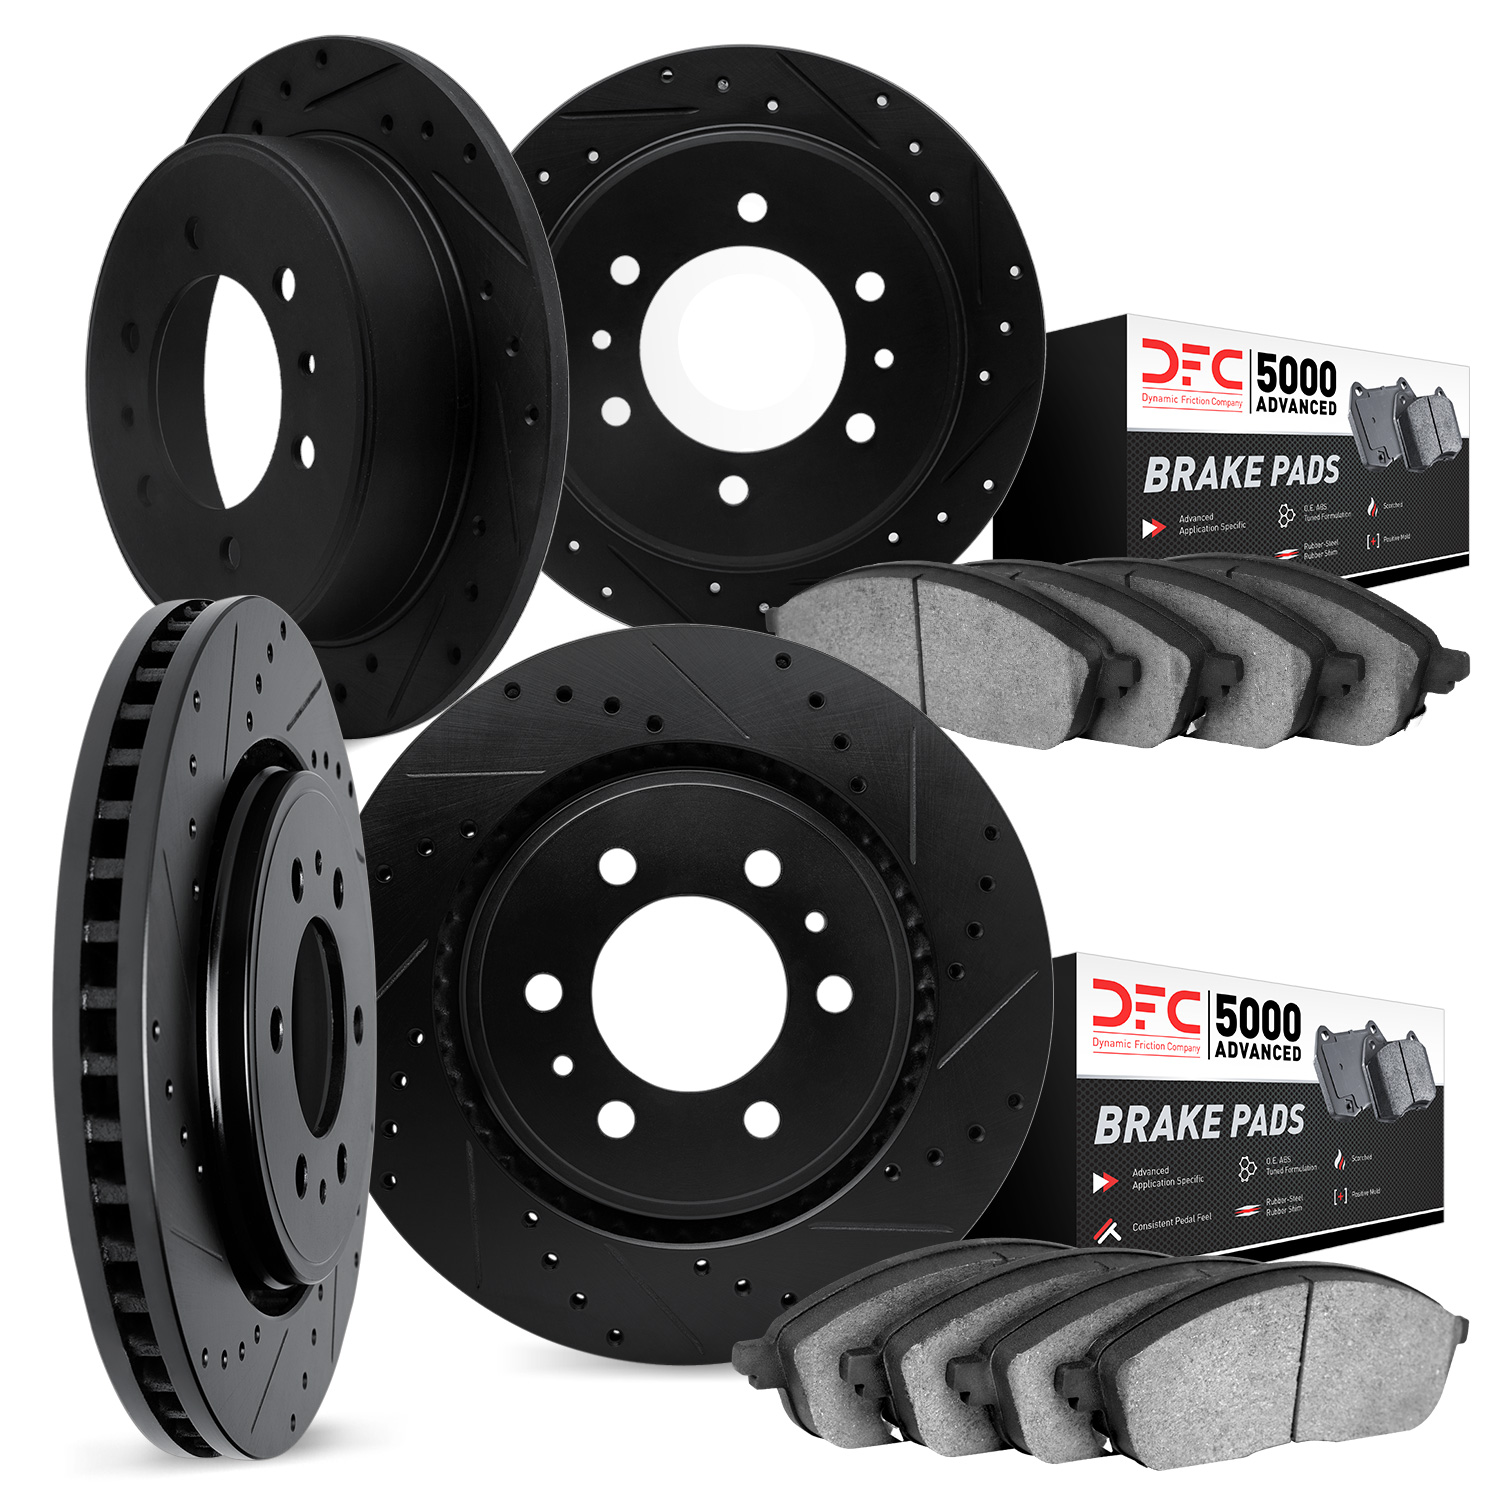 8504-72051 Drilled/Slotted Brake Rotors w/5000 Advanced Brake Pads Kit [Black], 1990-2000 Mitsubishi, Position: Front and Rear